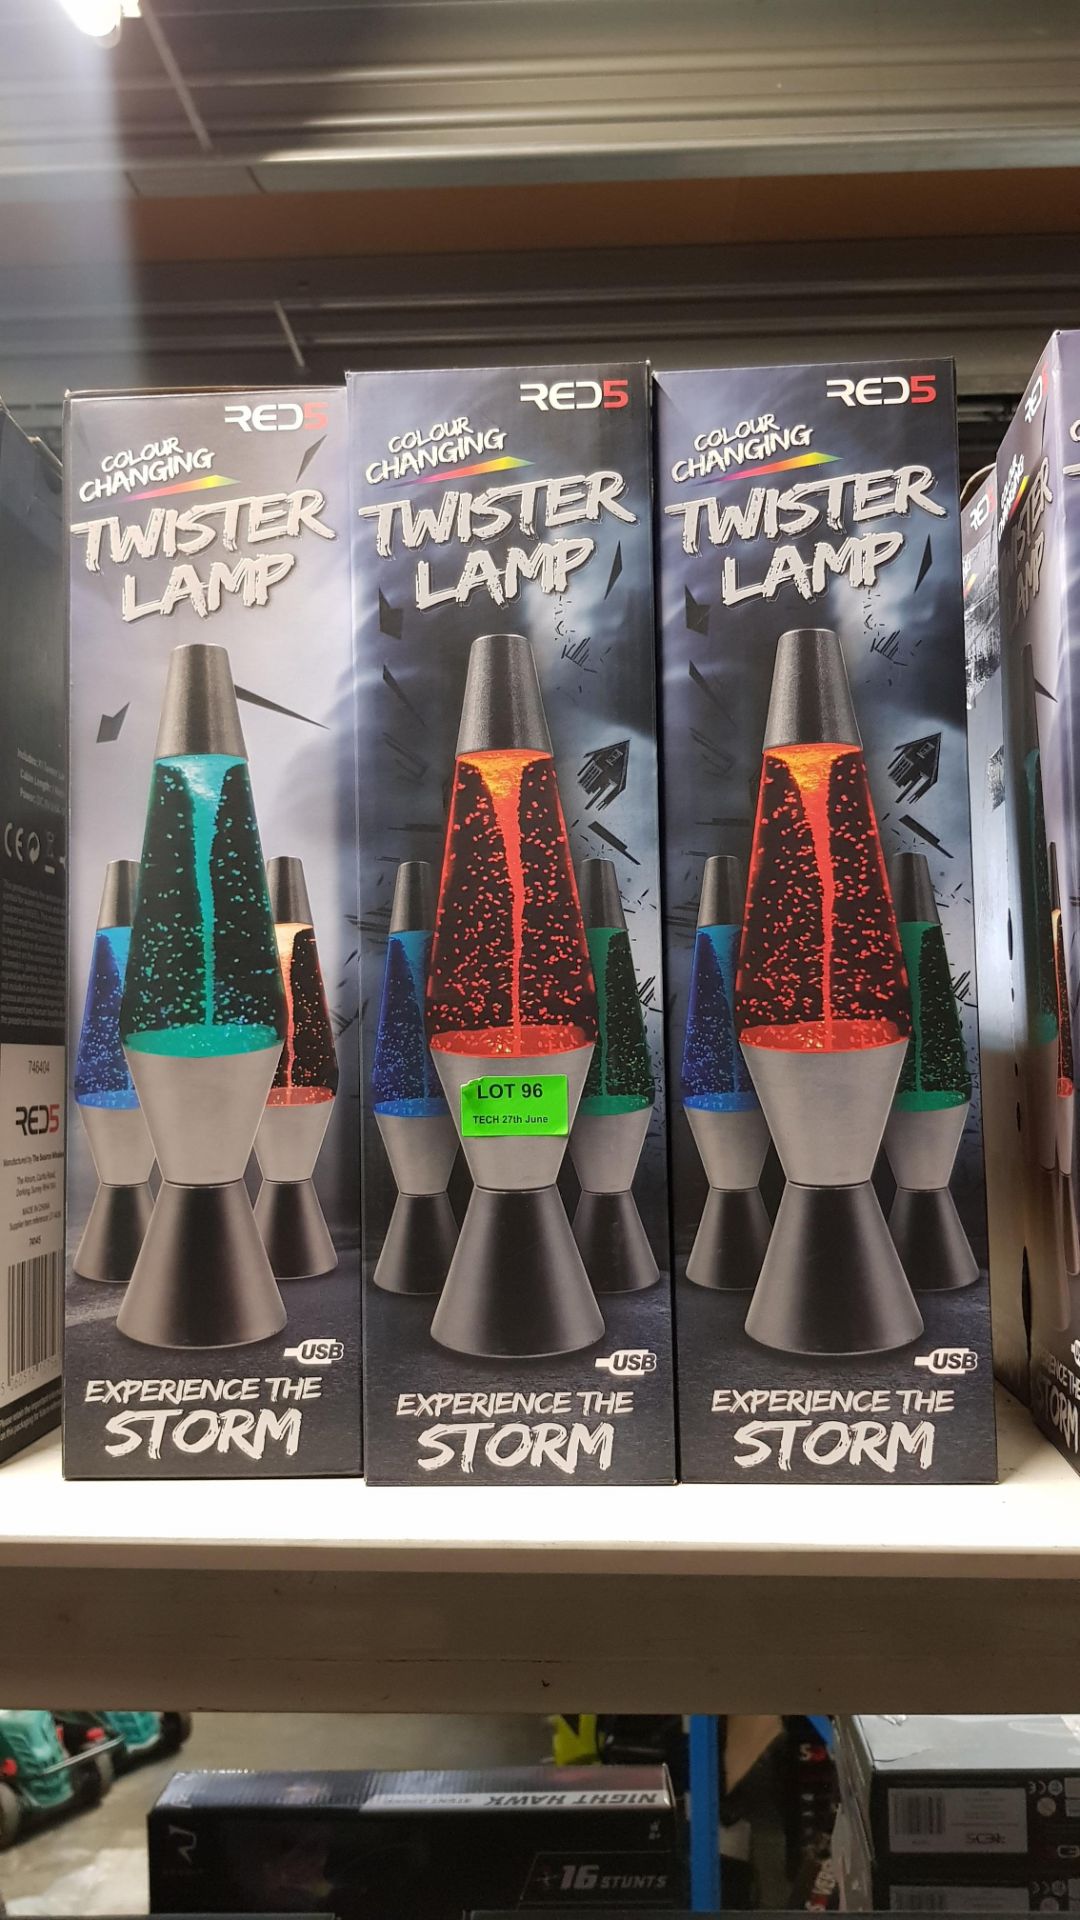 (R11I) 6x Red5 Colour Changing Twister Lamp - Image 2 of 2